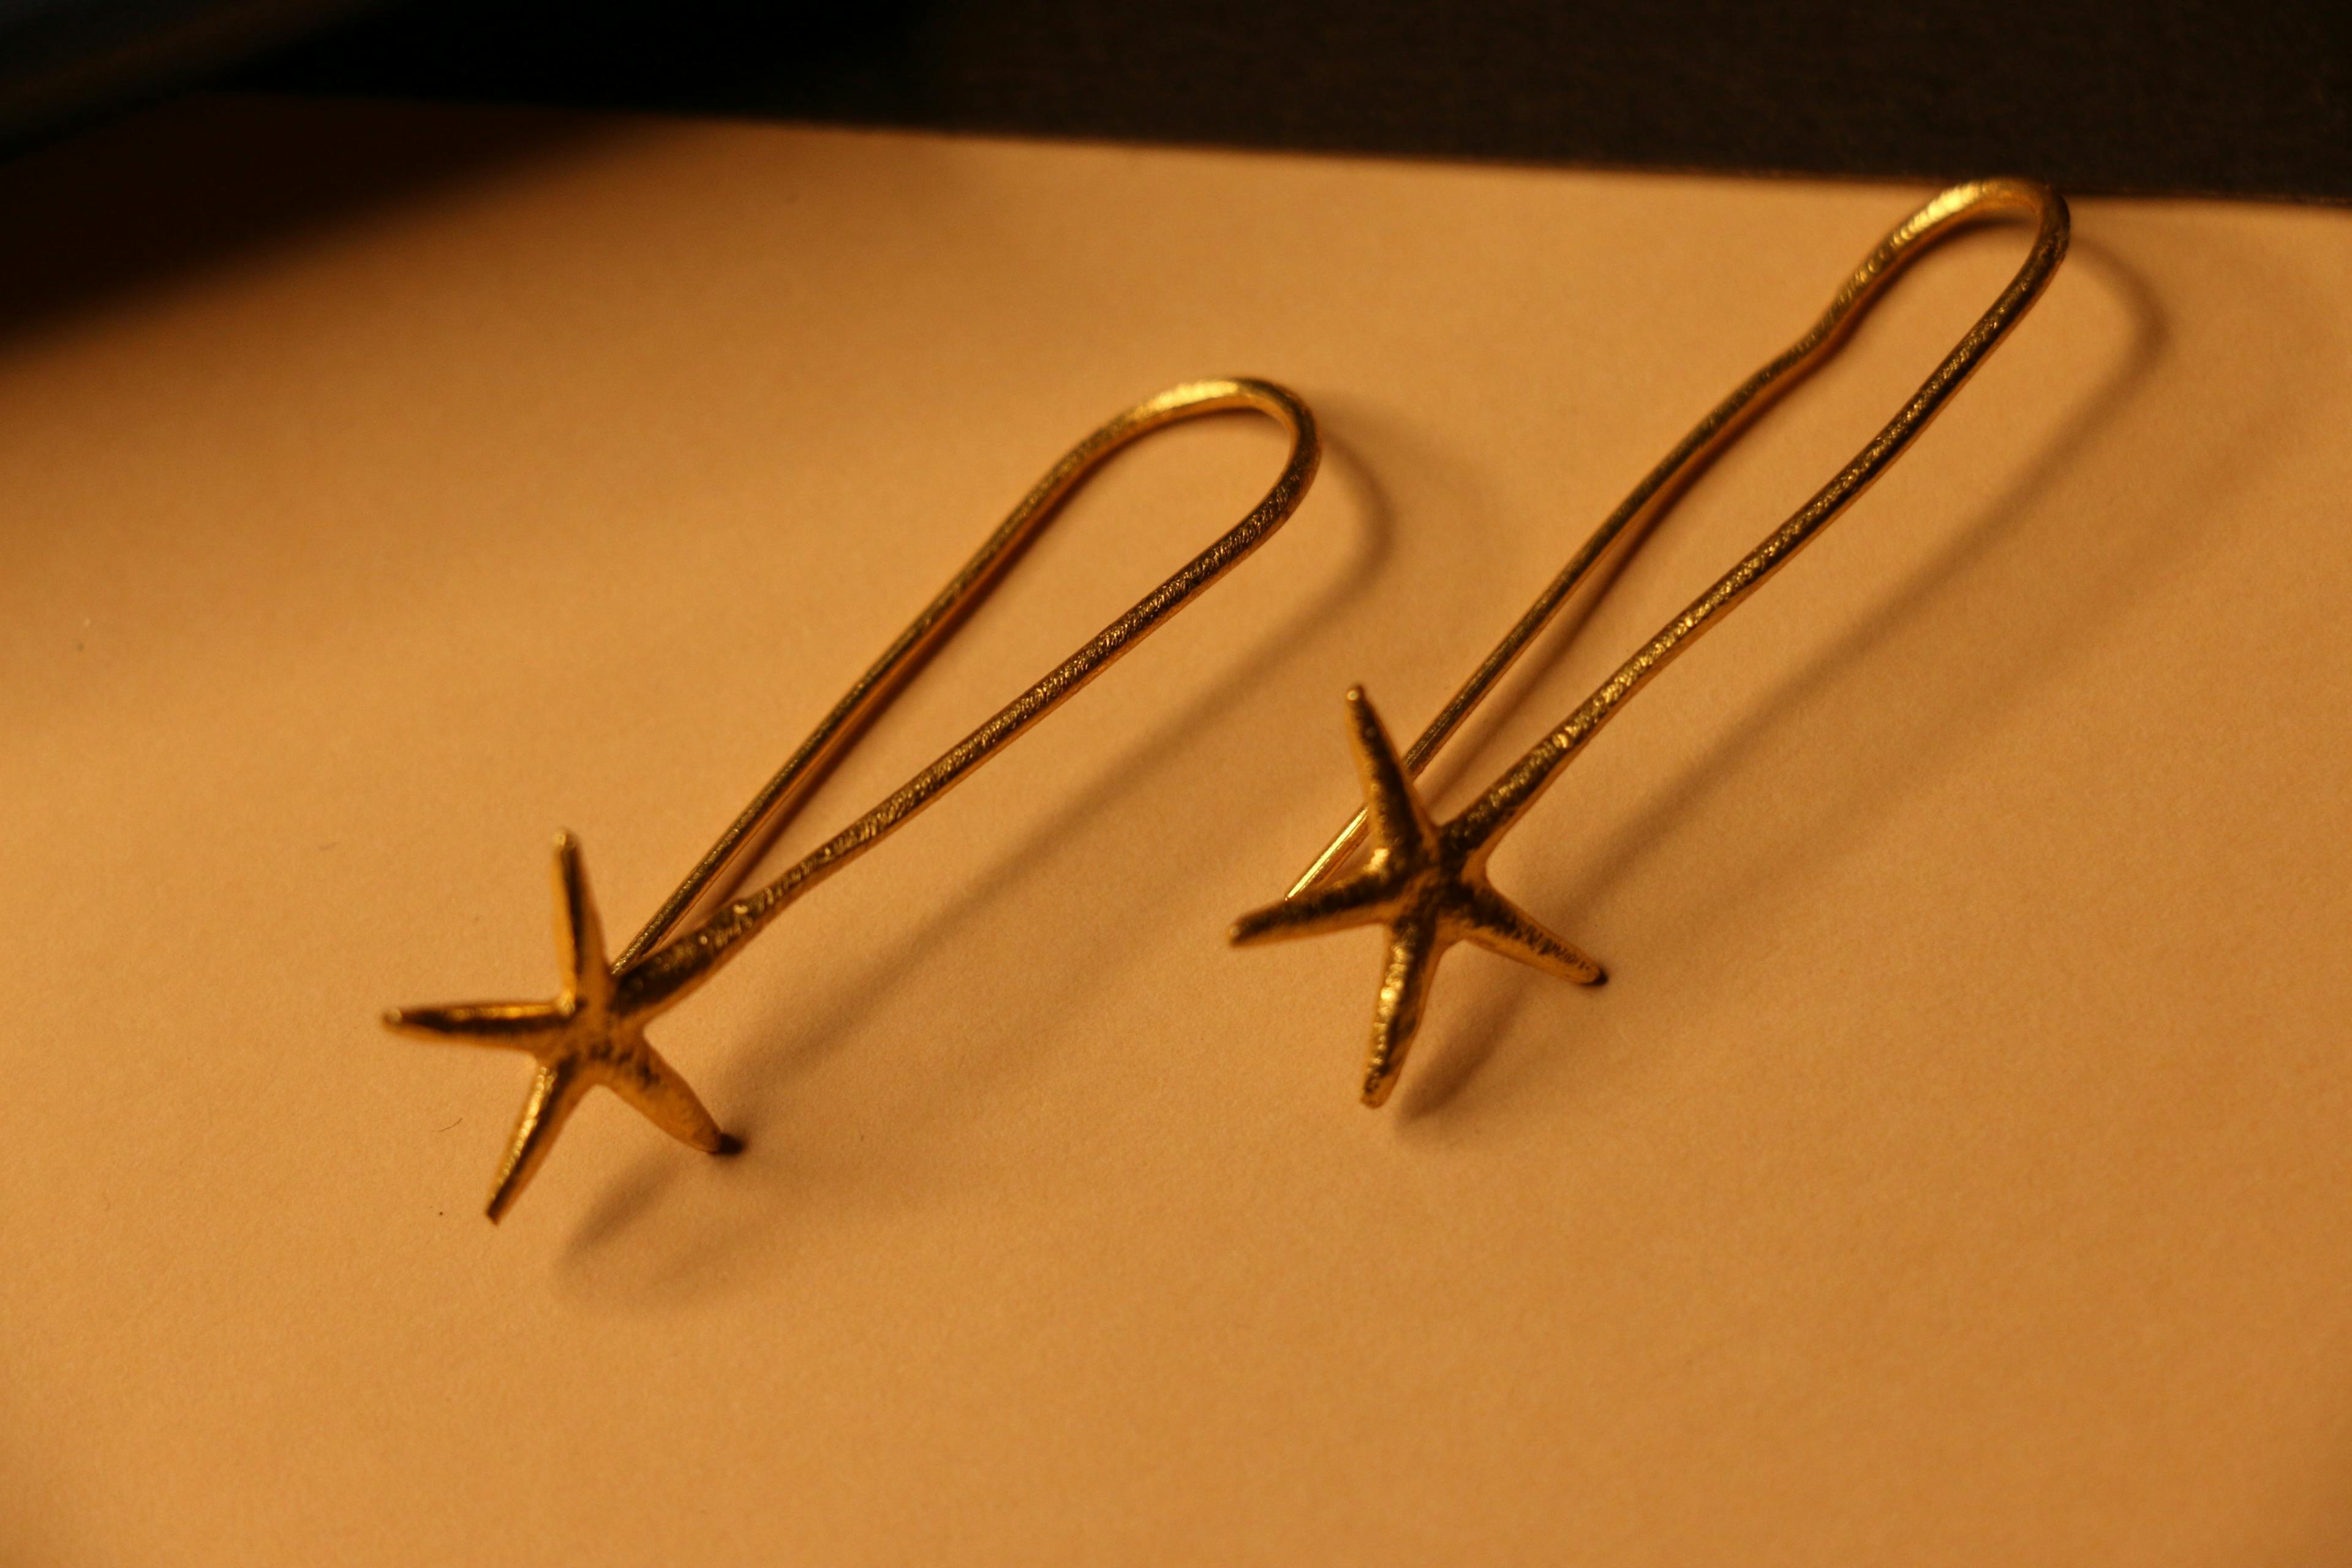 Star cuff earrings, a product by The Jewel Closet Store